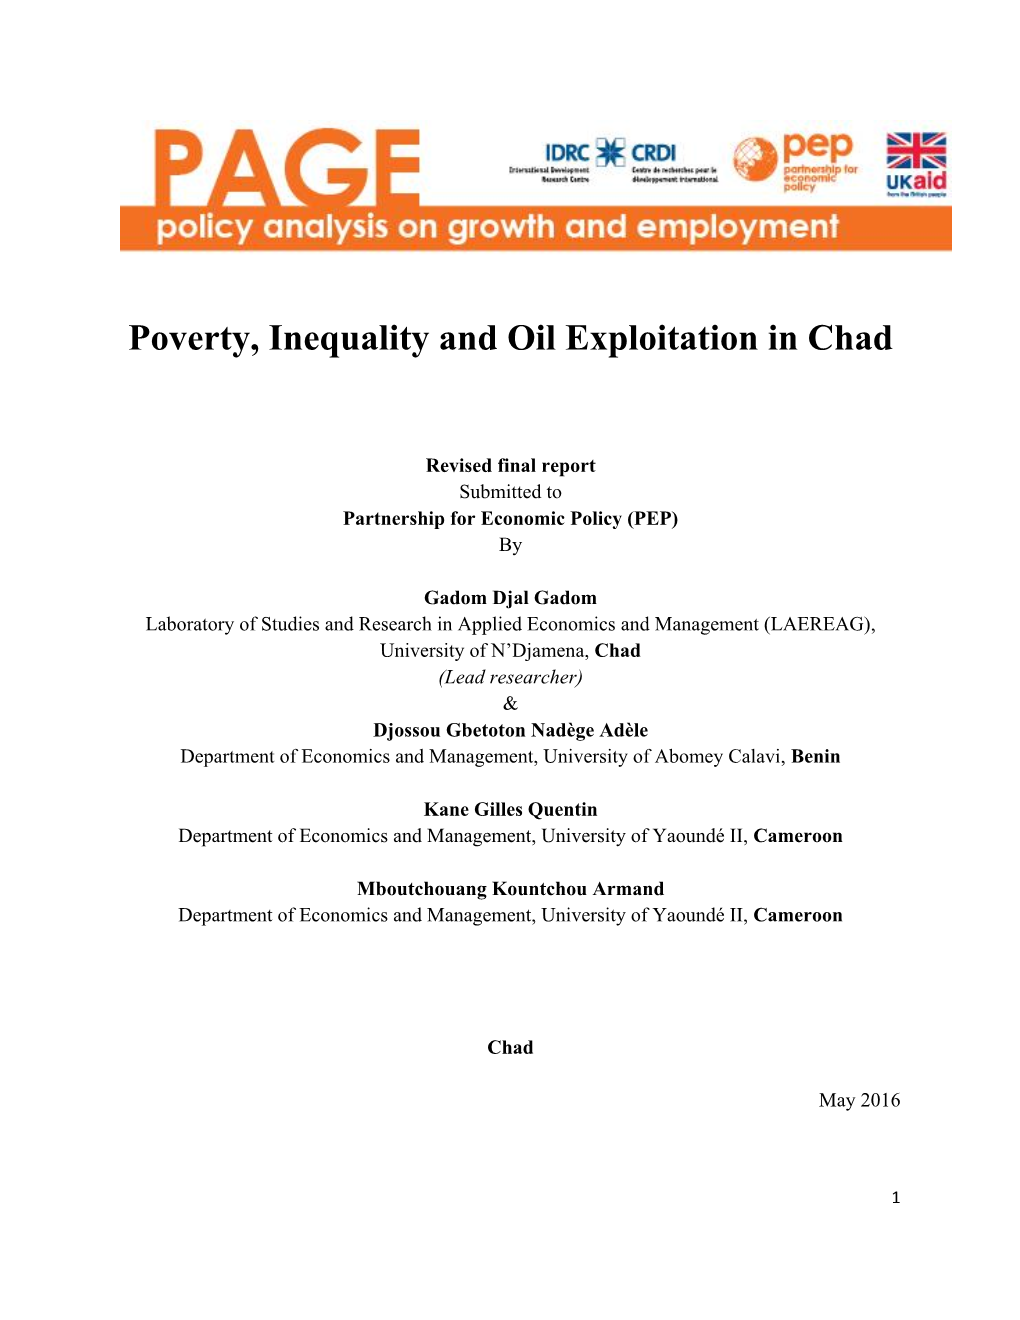 Poverty, Inequality and Oil Exploitation in Chad